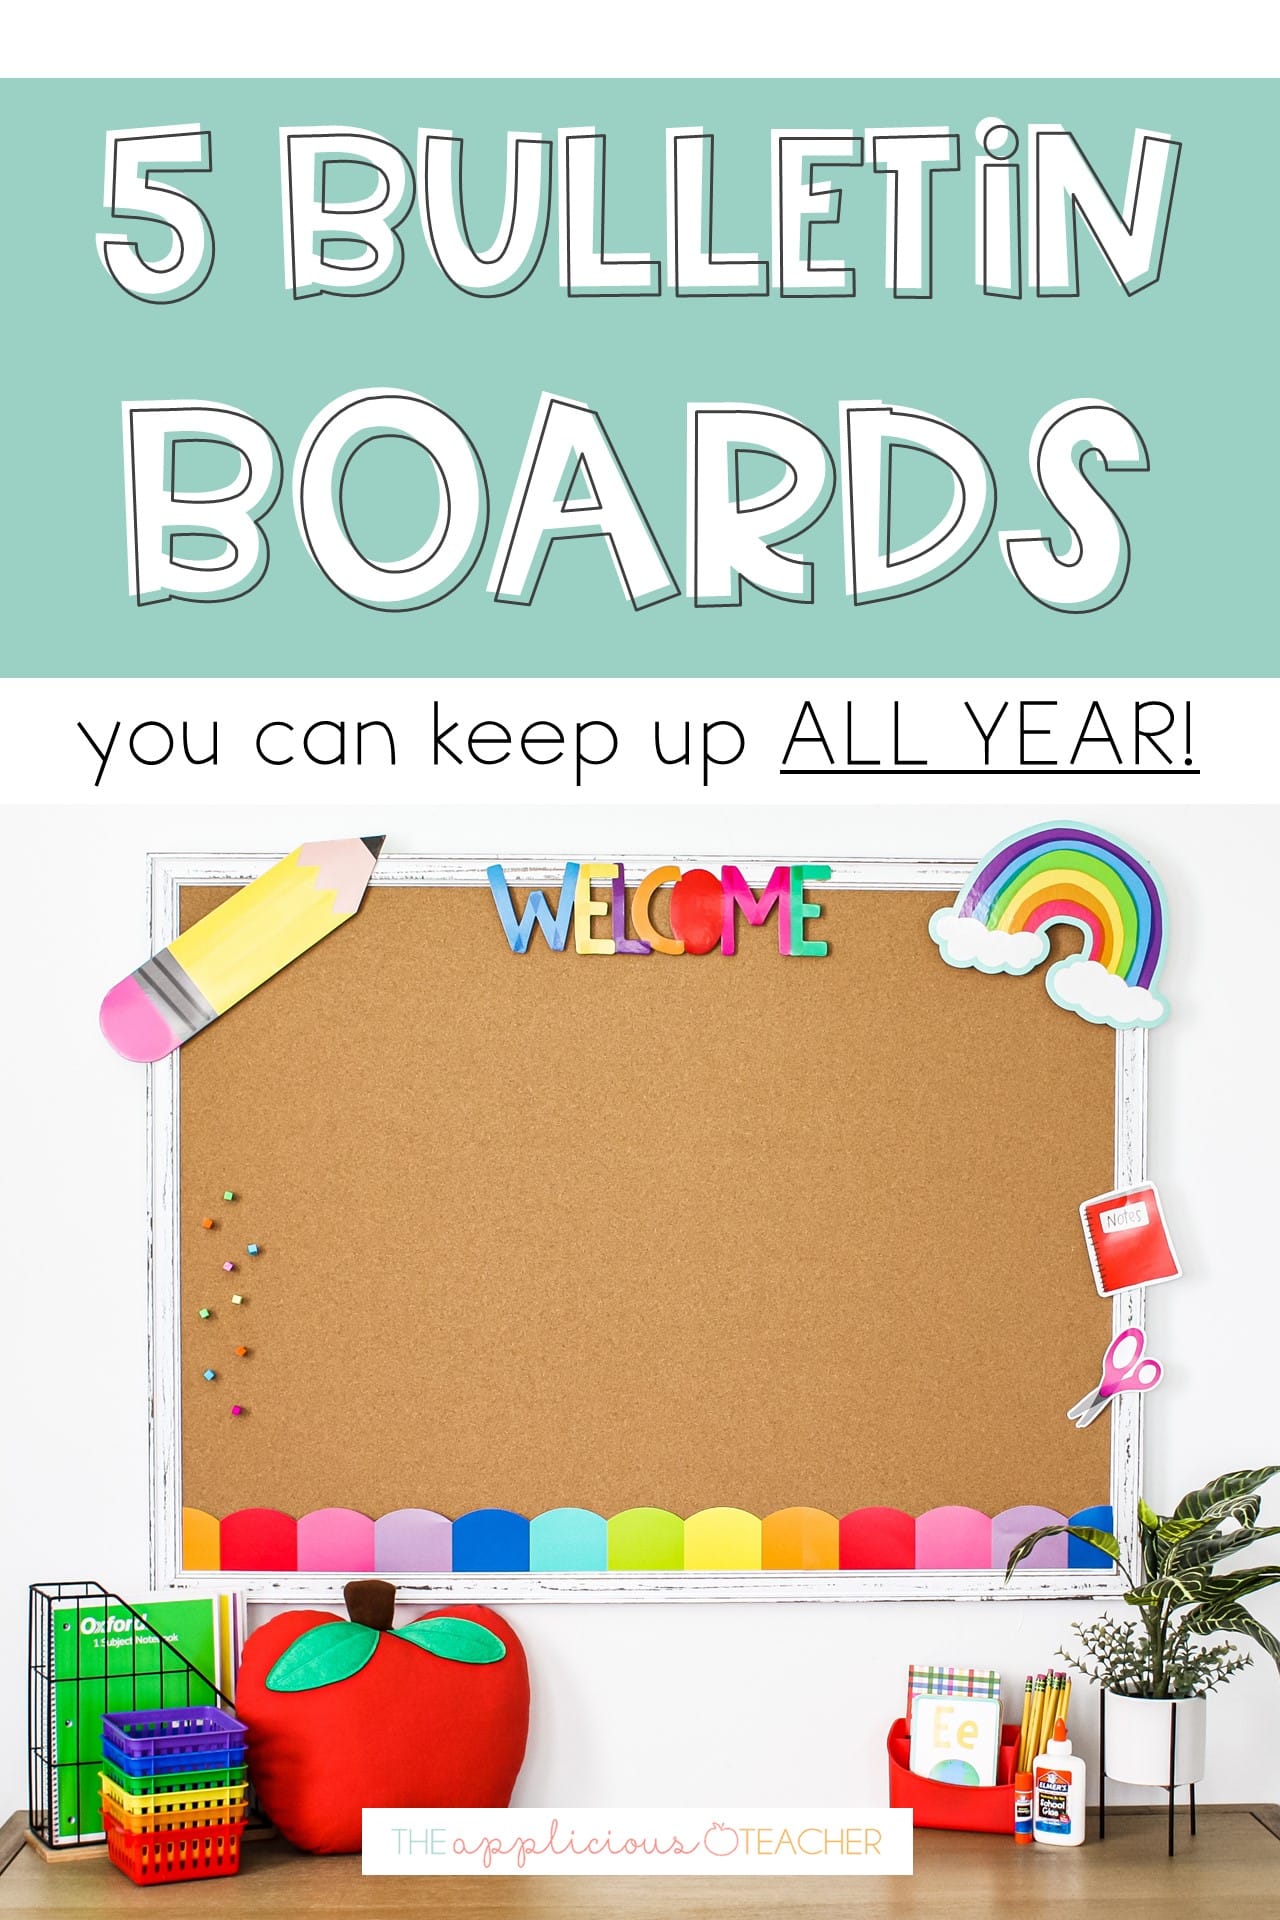 5 Bulletin Boards That You Can Keep Up All Year The Applicious Teacher